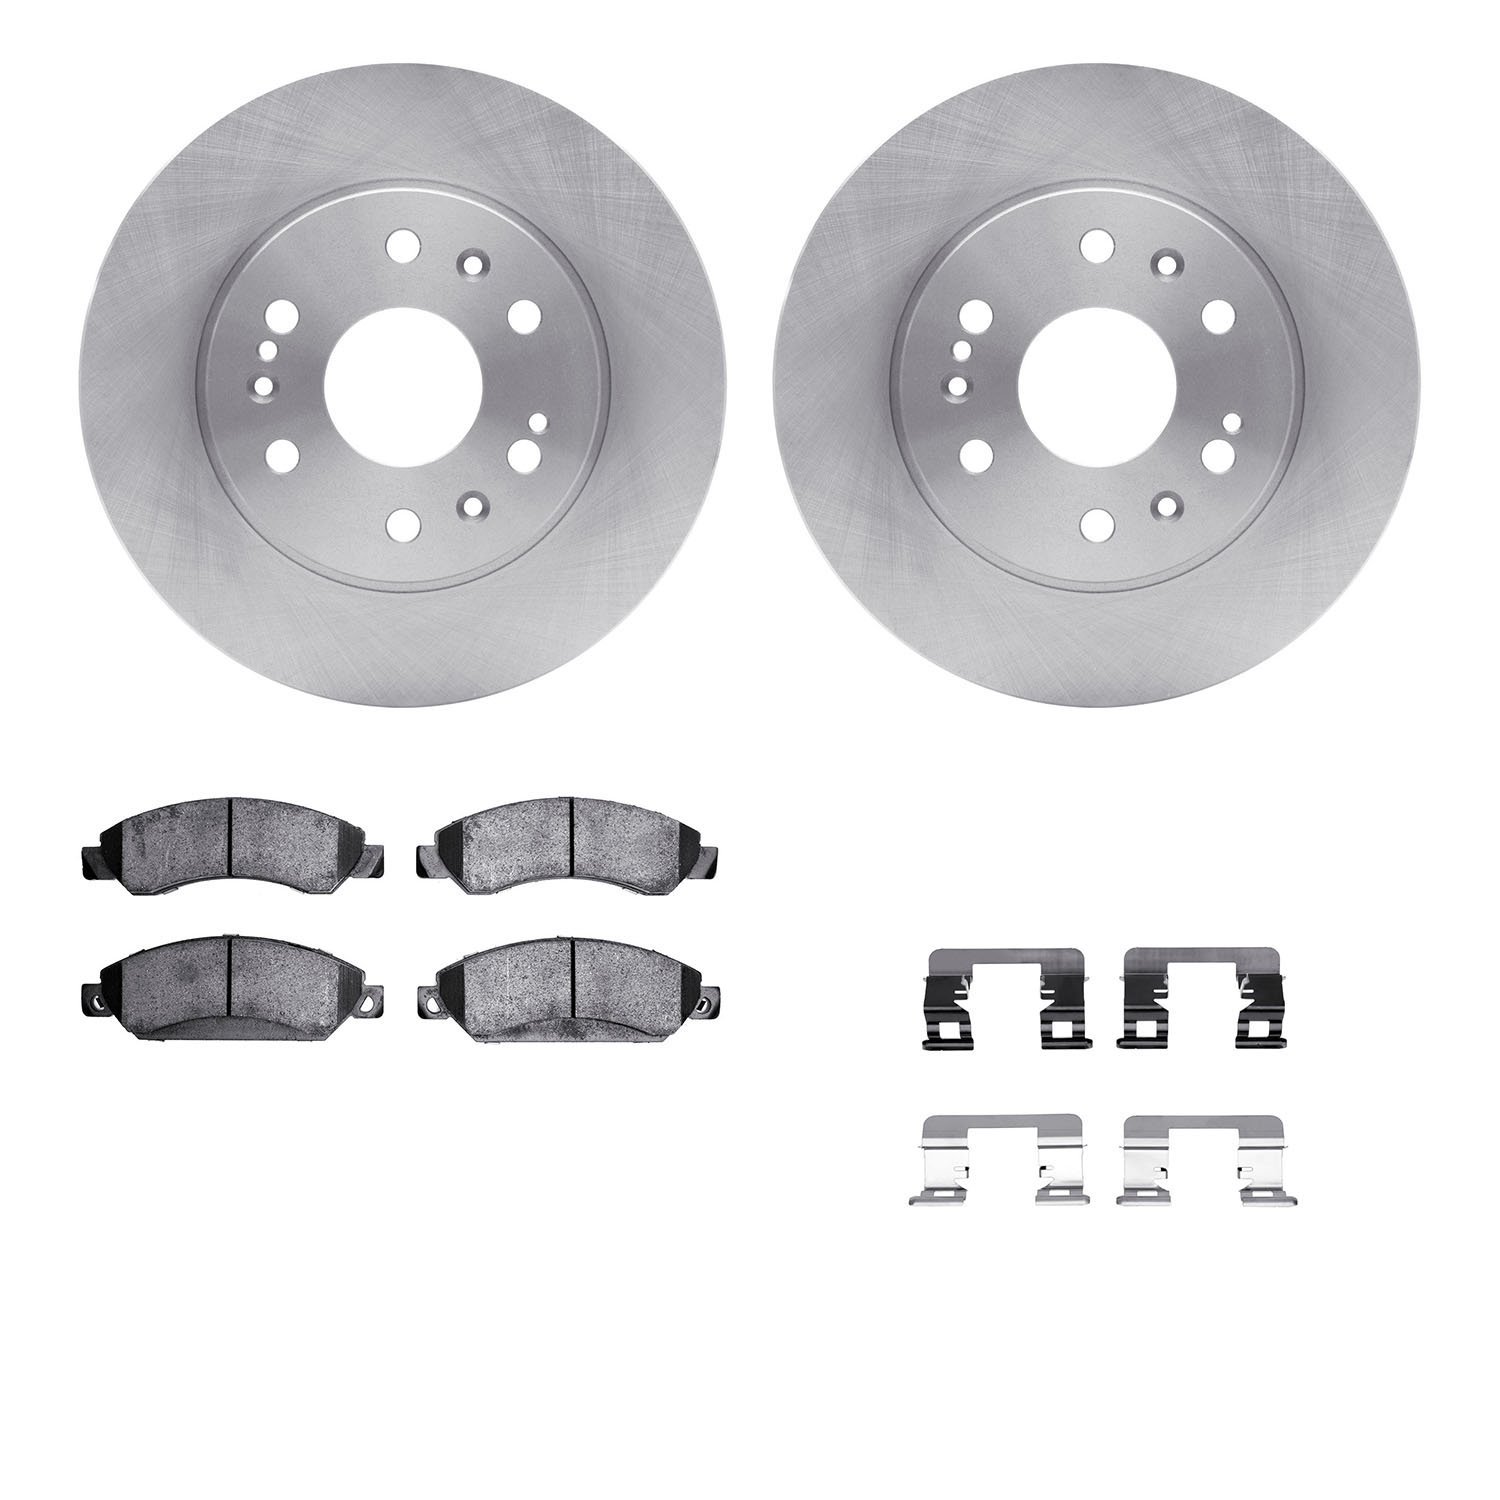 6412-48103 Brake Rotors with Ultimate-Duty Brake Pads Kit & Hardware, 2005-2008 GM, Position: Front